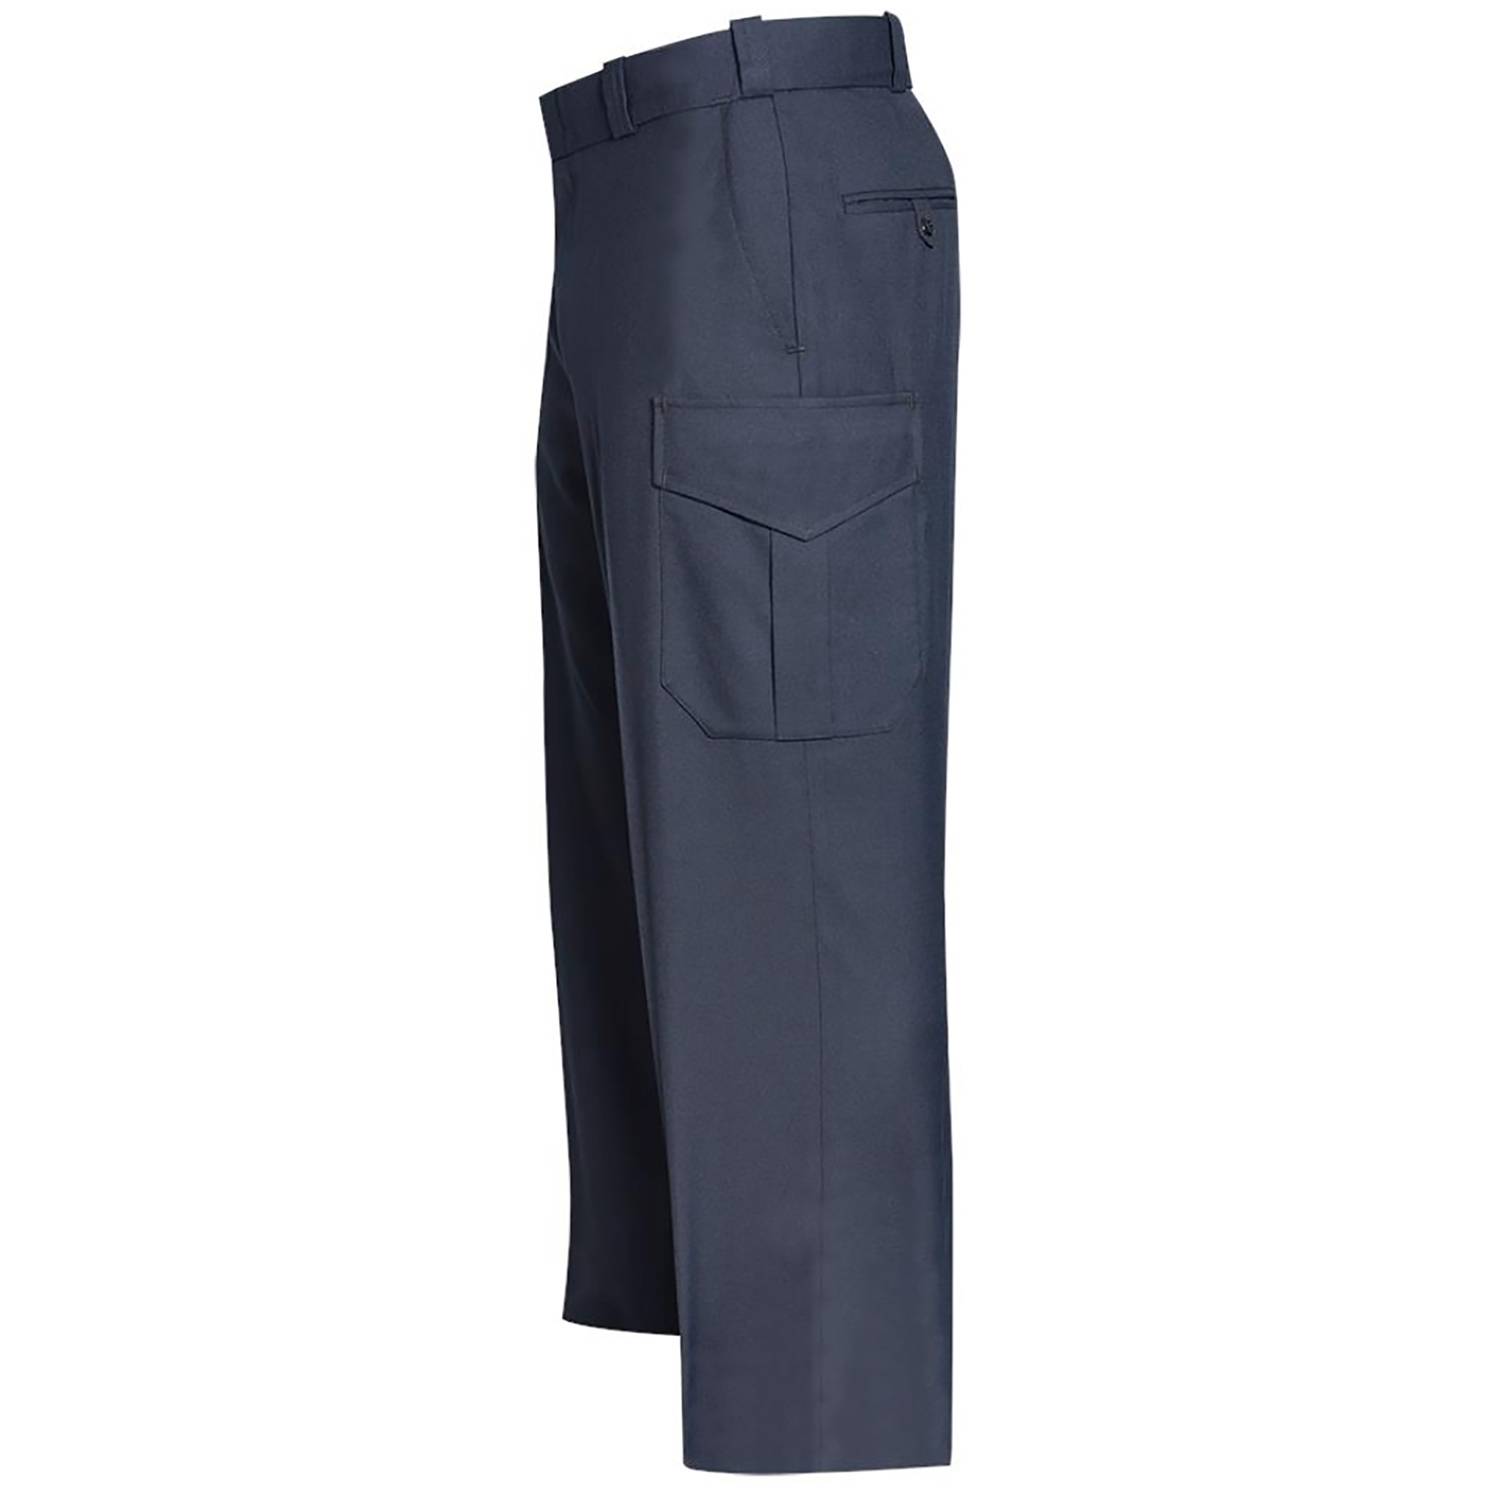 justice cargo pants